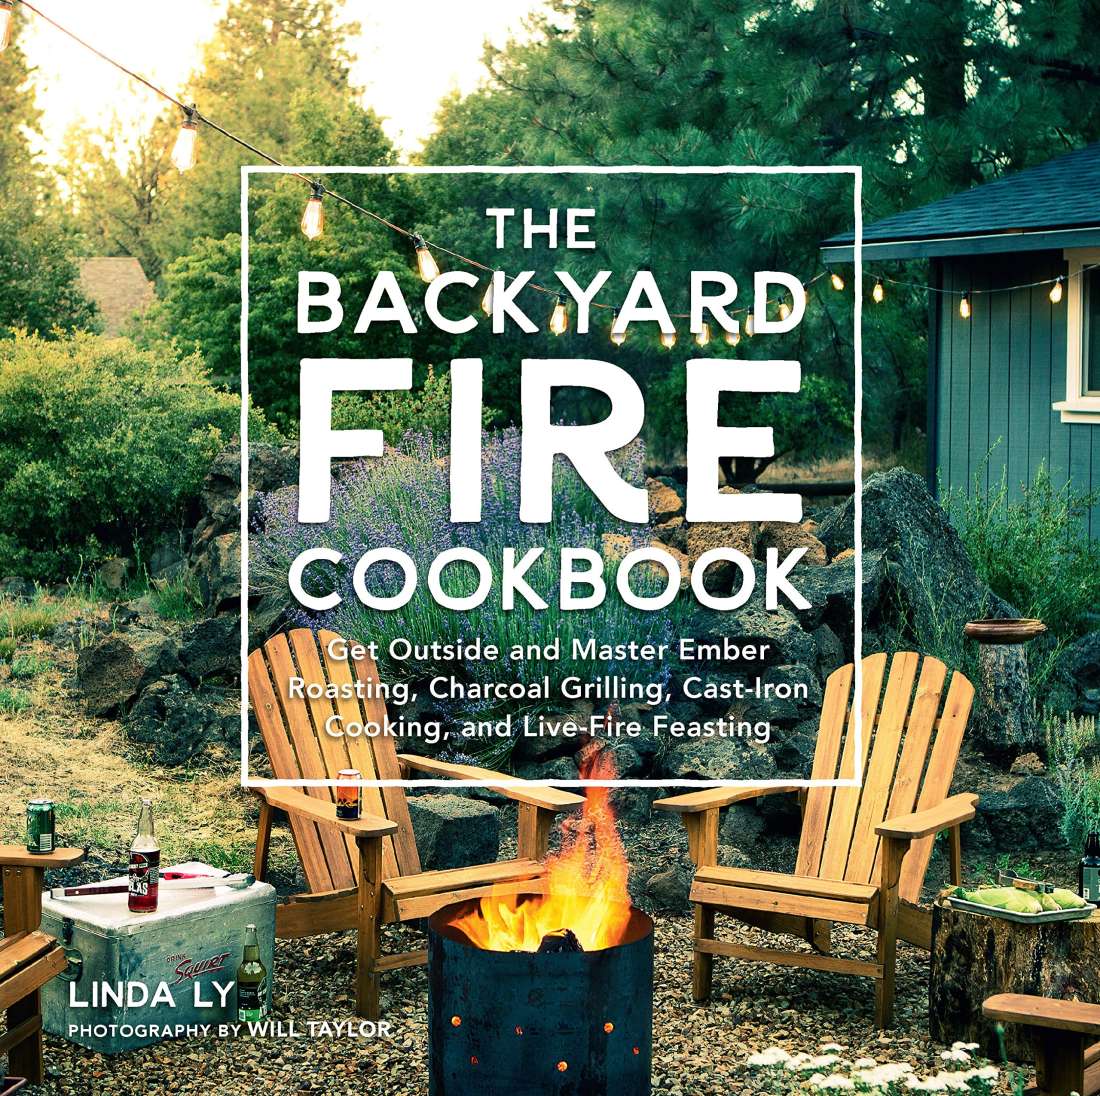 The Backyard Fire Cookbook by Linda Ly